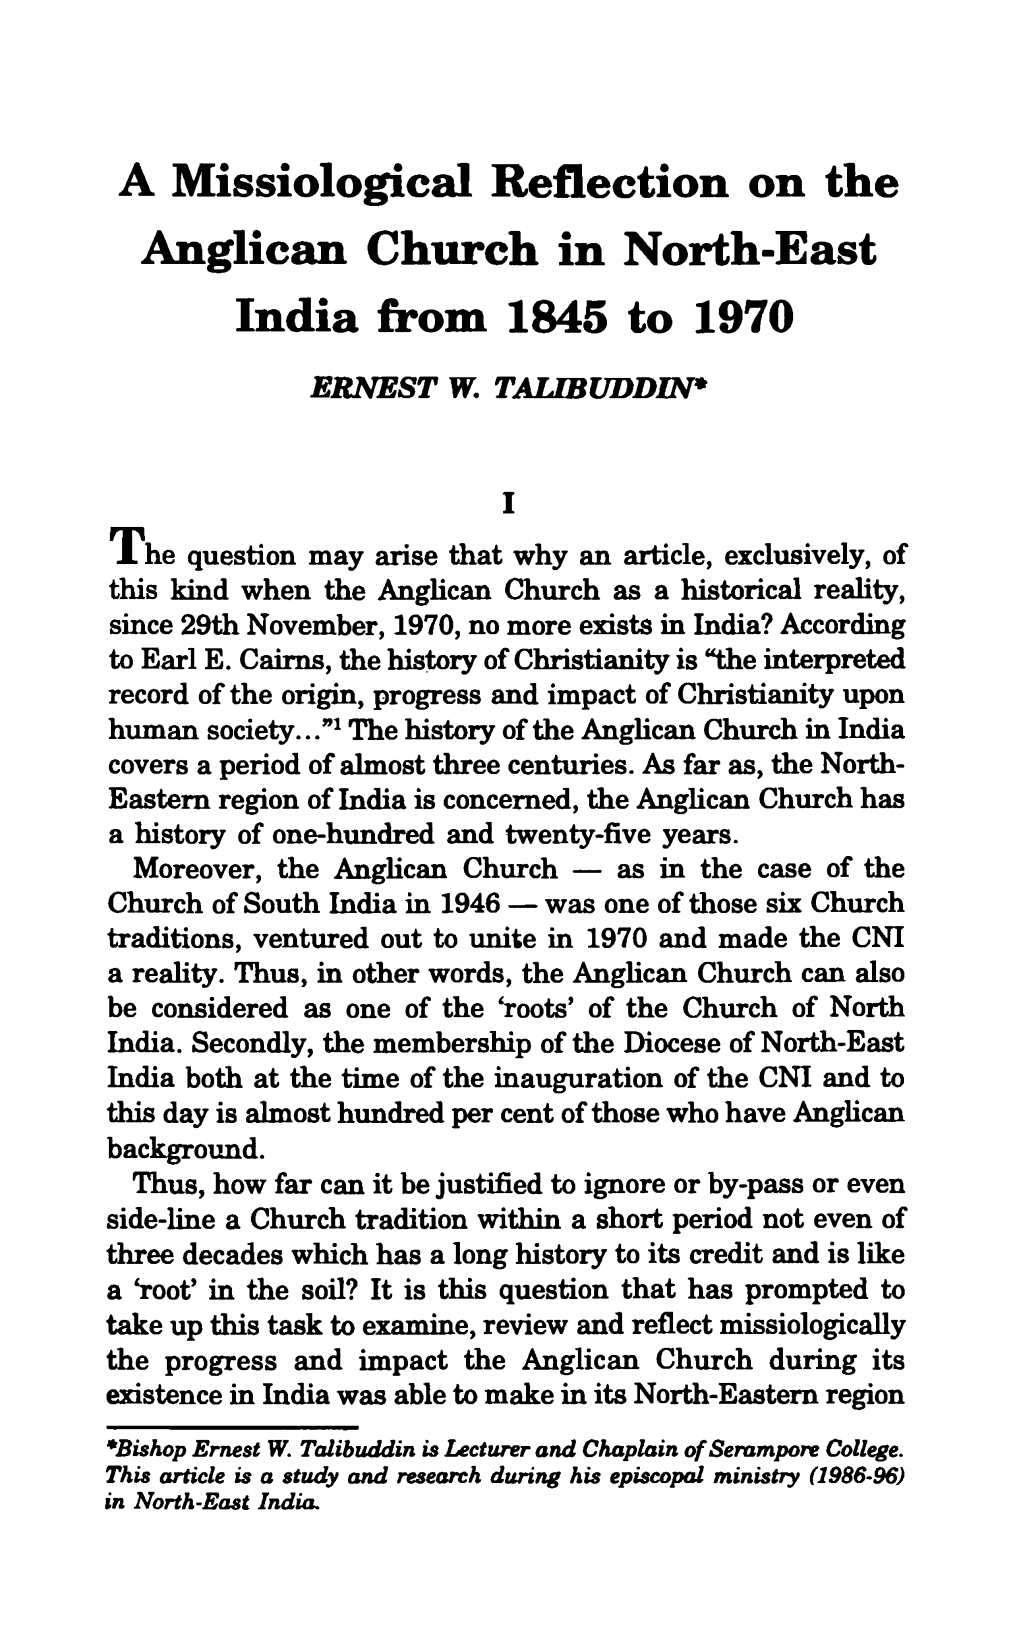 EW Talibuddin, "A Missiological Reflection on the Anglican Church in North-East India from 1845 to 1970,"